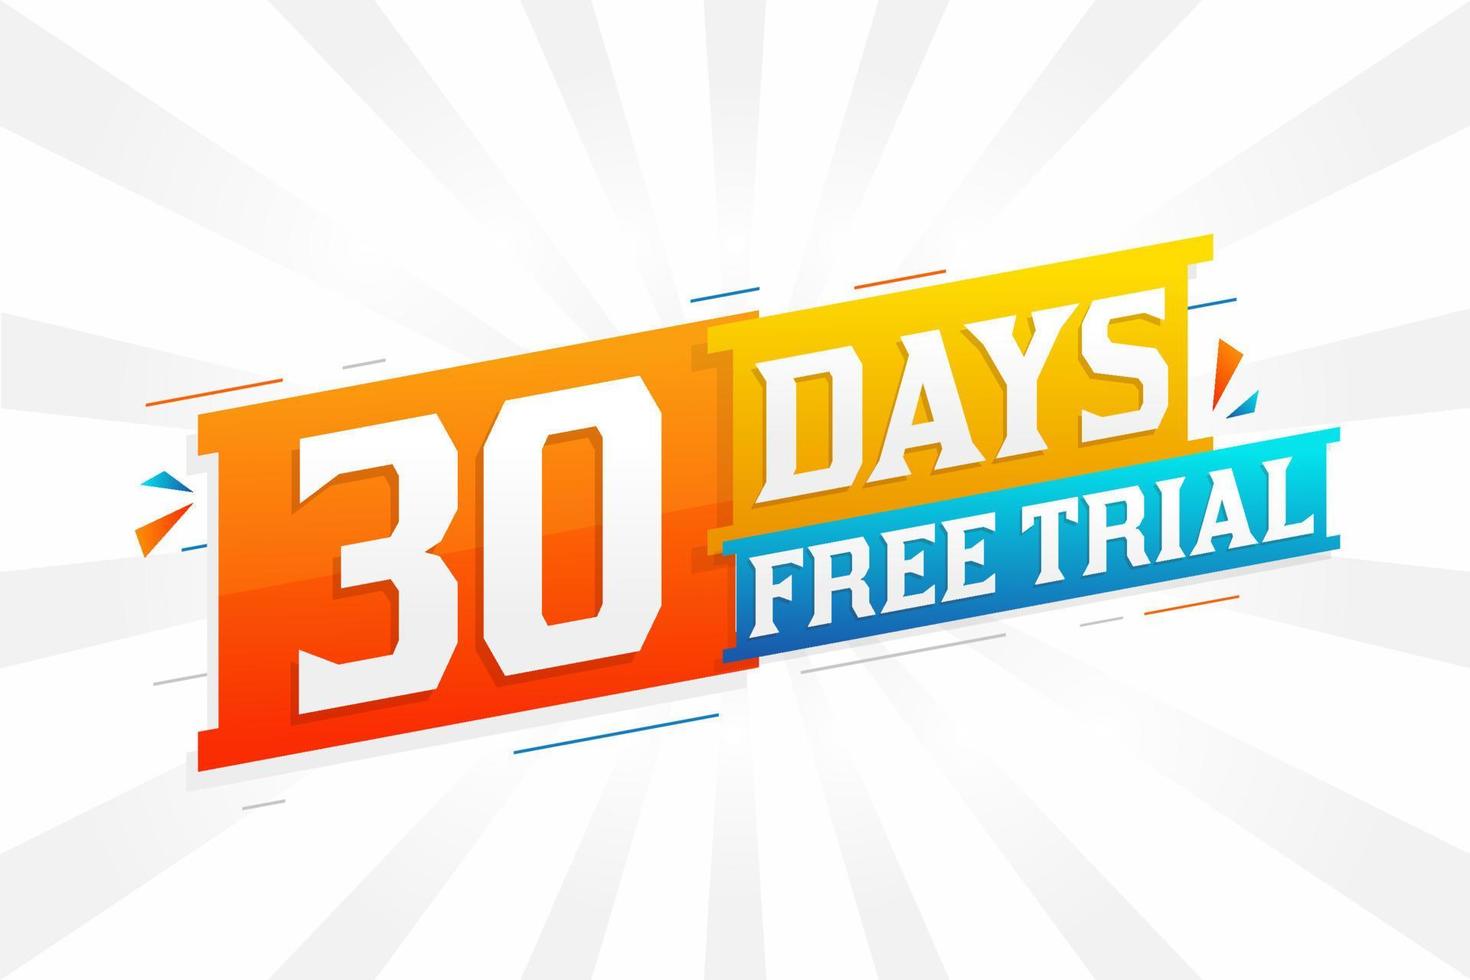 30 Days free Trial promotional bold text stock vector